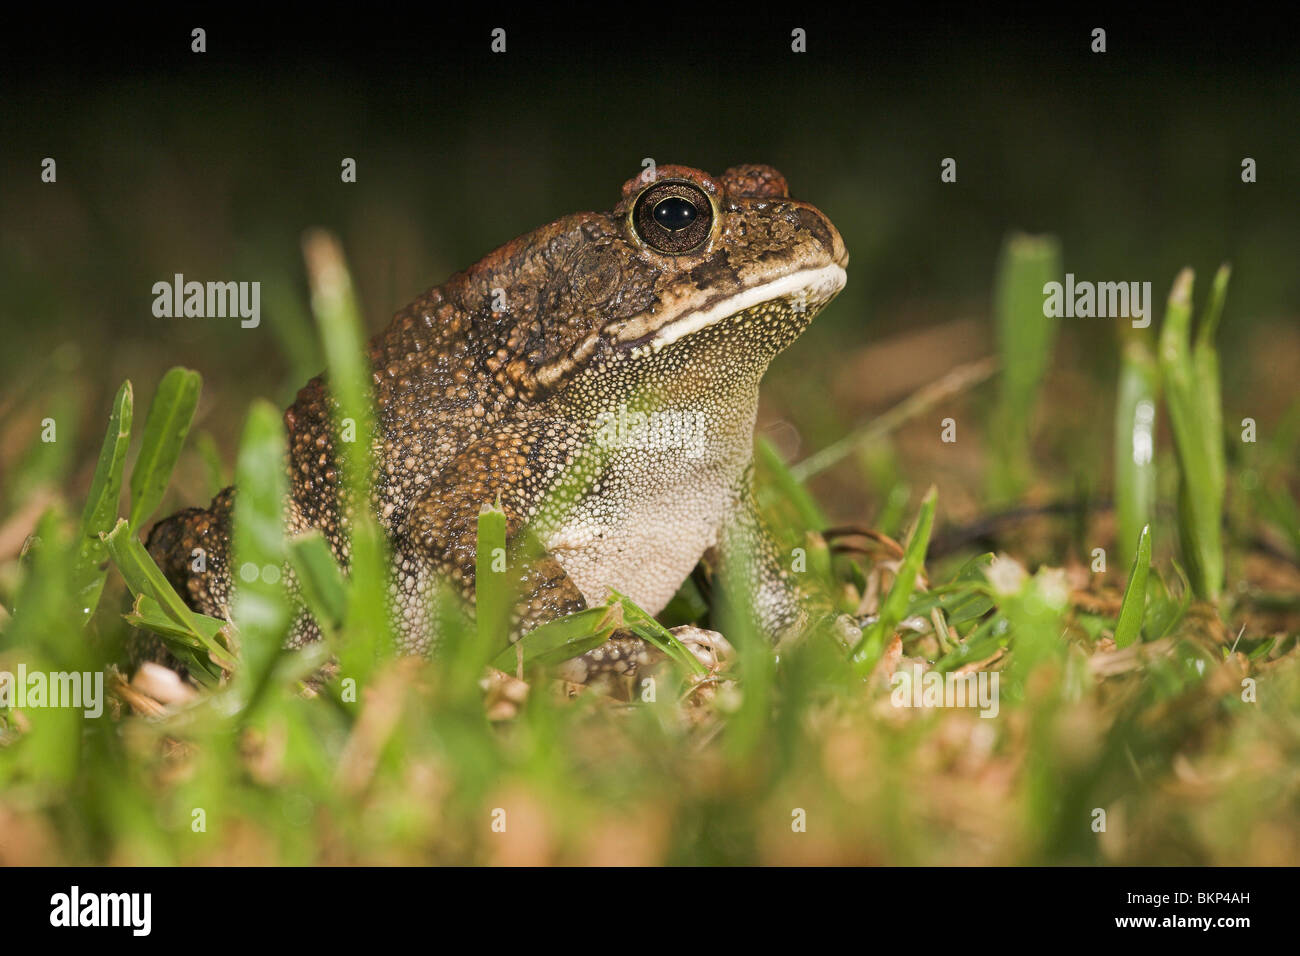 photo of a gutteral toad between green grass after rain during the night Stock Photo